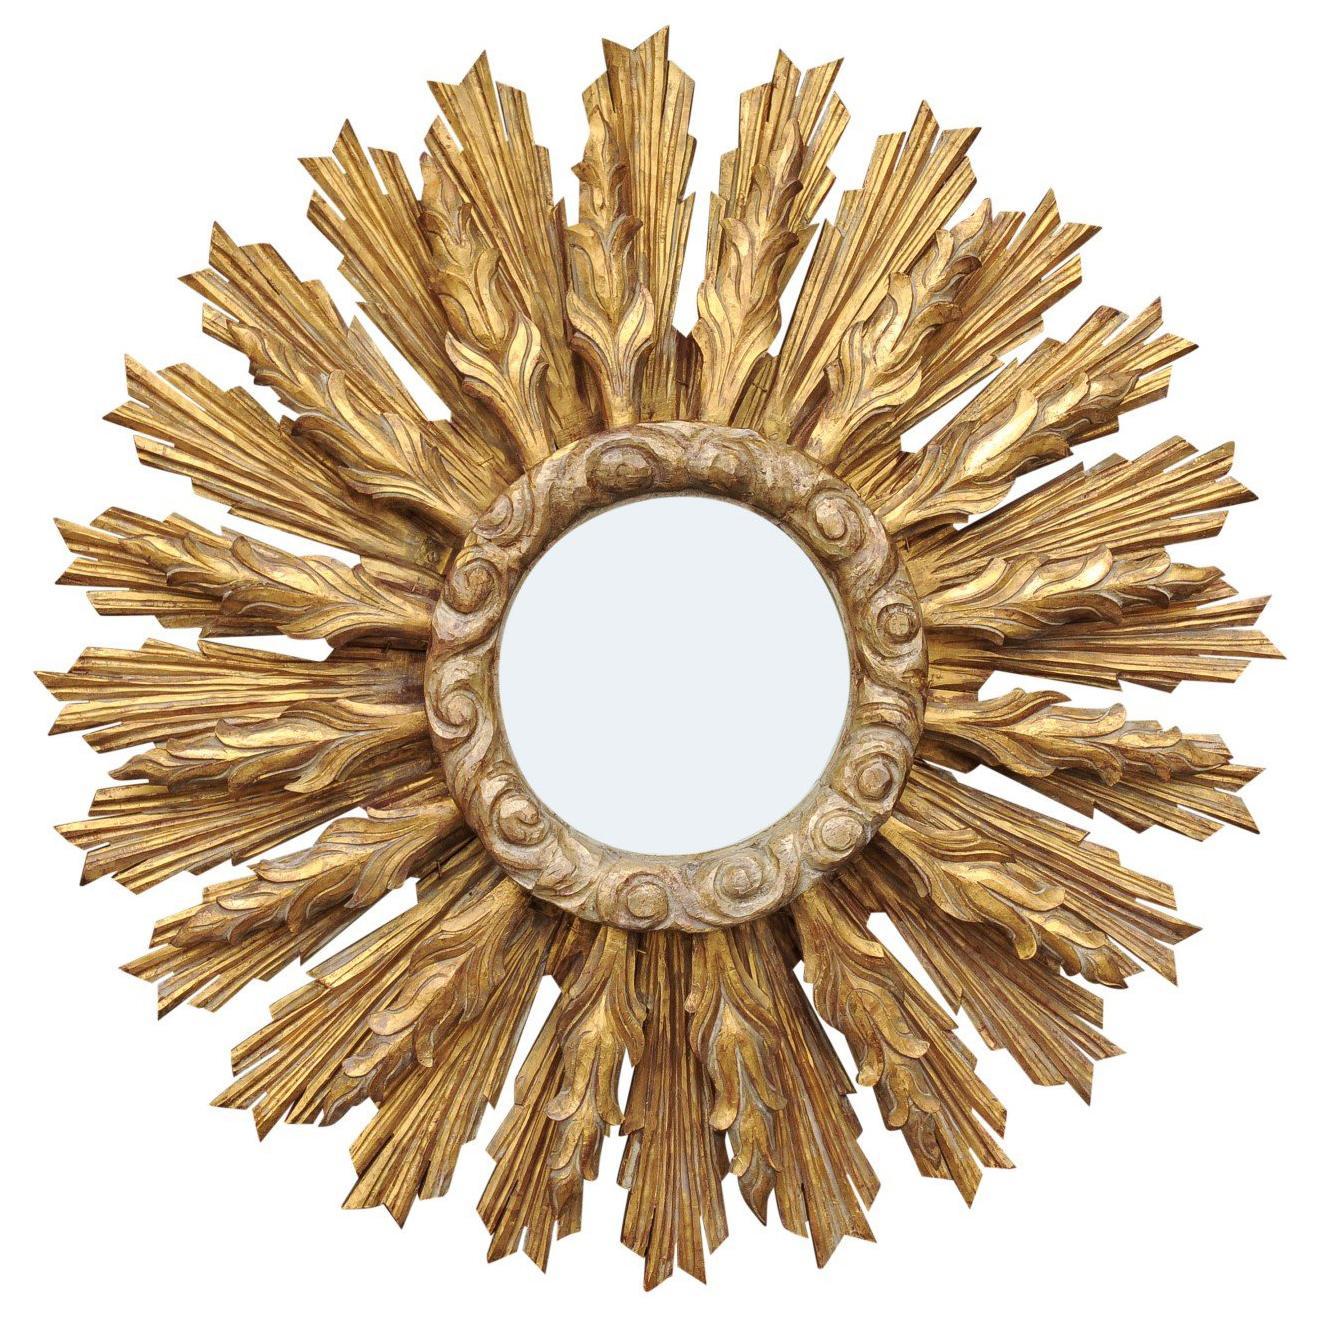 Continental Carved Giltwood Sunburst Mirror with Layered Rays and Cloudy Motifs